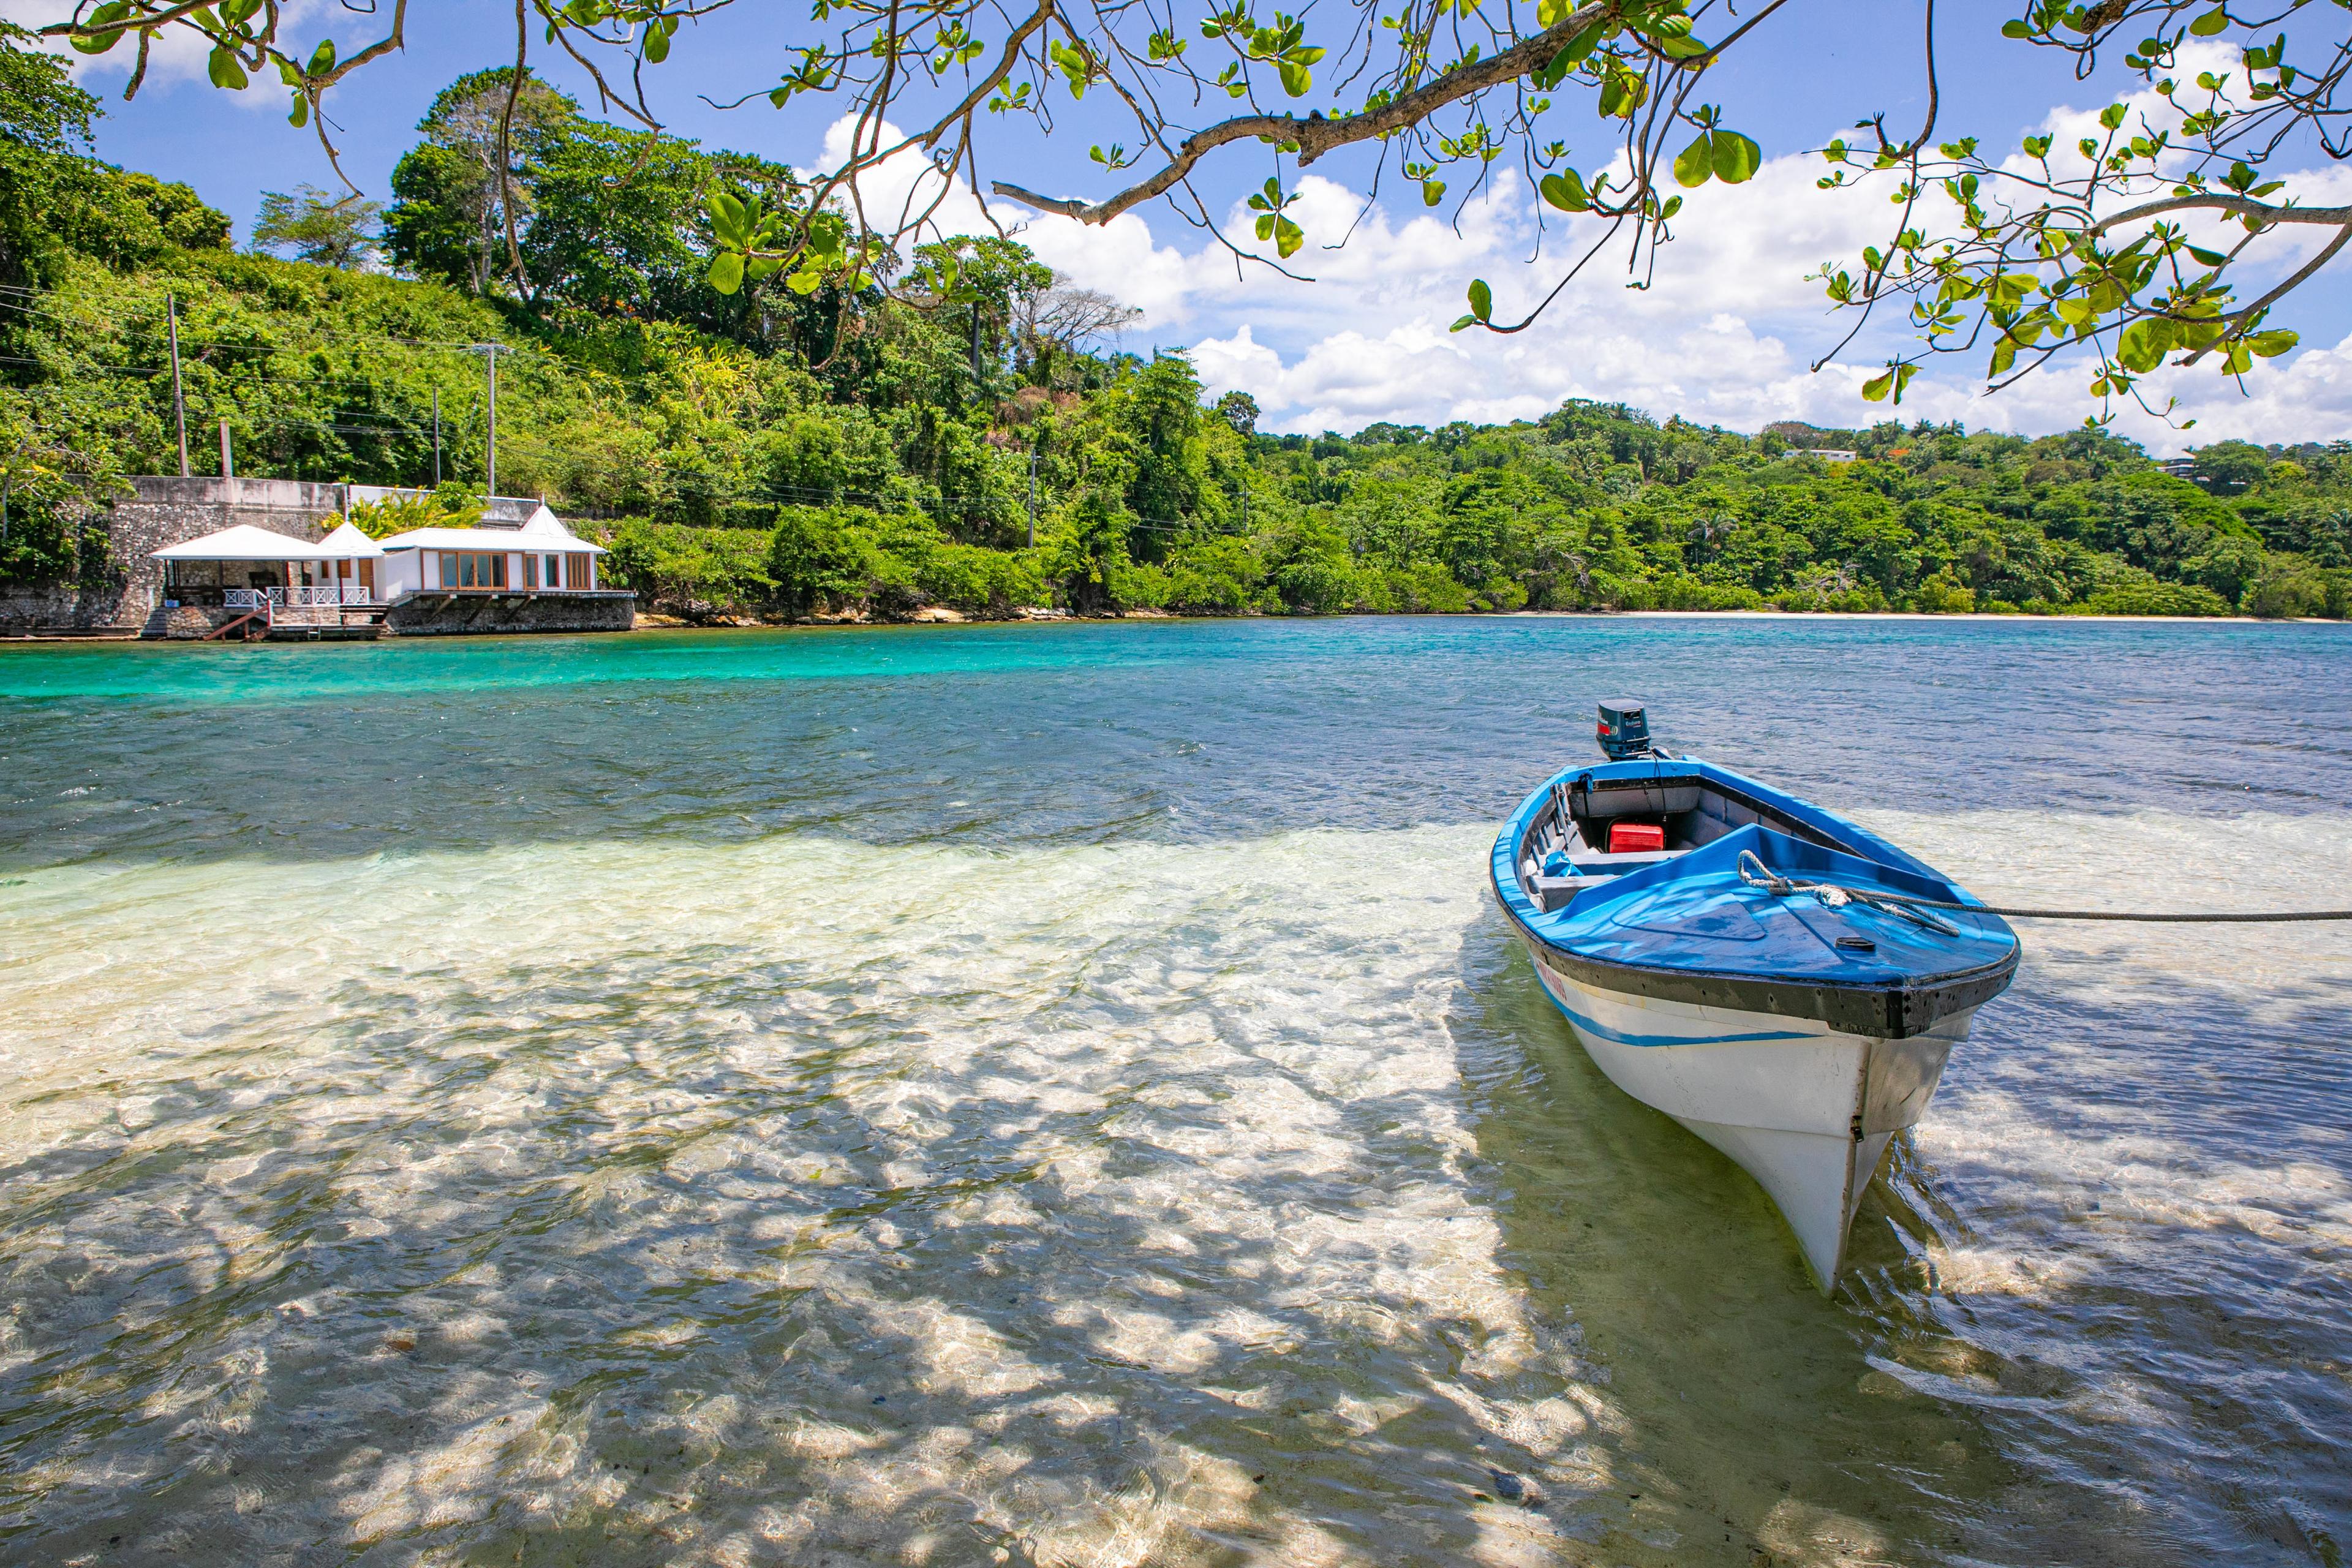 8 Fascinating Facts You Probably Don't Know About Jamaica